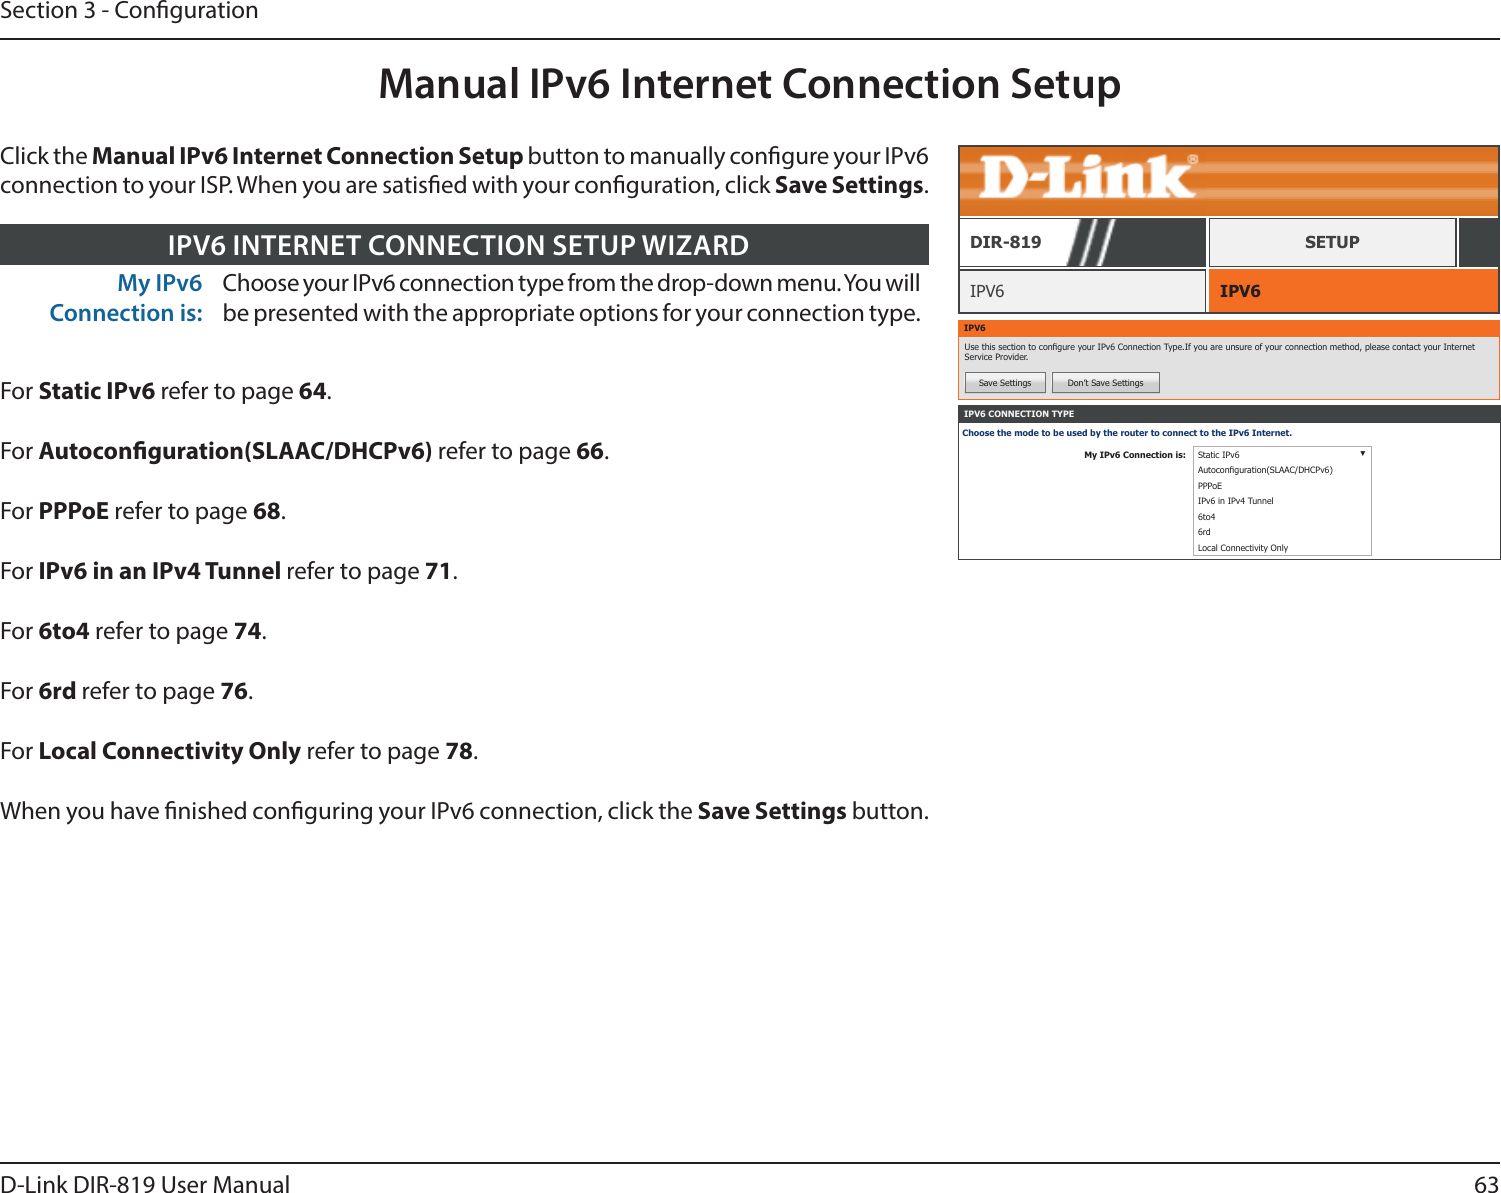 63D-Link DIR-819 User ManualSection 3 - CongurationManual IPv6 Internet Connection SetupIPV6 IPV6DIR-819 SETUPIPV6Use this section to congure your IPv6 Connection Type.If you are unsure of your connection method, please contact your Internet Service Provider.Save Settings Don’t Save SettingsIPV6 CONNECTION TYPEChoose the mode to be used by the router to connect to the IPv6 Internet.My IPv6 Connection is: Static IPv6 ▼Autoconguration(SLAAC/DHCPv6)PPPoEIPv6 in IPv4 Tunnel6to46rdLocal Connectivity OnlyMy IPv6 Connection is:Choose your IPv6 connection type from the drop-down menu. You will be presented with the appropriate options for your connection type.IPV6 INTERNET CONNECTION SETUP WIZARDFor Static IPv6 refer to page 64.For Autoconguration(SLAAC/DHCPv6) refer to page 66.For PPPoE refer to page 68.For IPv6 in an IPv4 Tunnel refer to page 71.For 6to4 refer to page 74.For 6rd refer to page 76.For Local Connectivity Only refer to page 78.When you have nished conguring your IPv6 connection, click the Save Settings button.Click the Manual IPv6 Internet Connection Setup button to manually congure your IPv6 connection to your ISP. When you are satised with your conguration, click Save Settings.